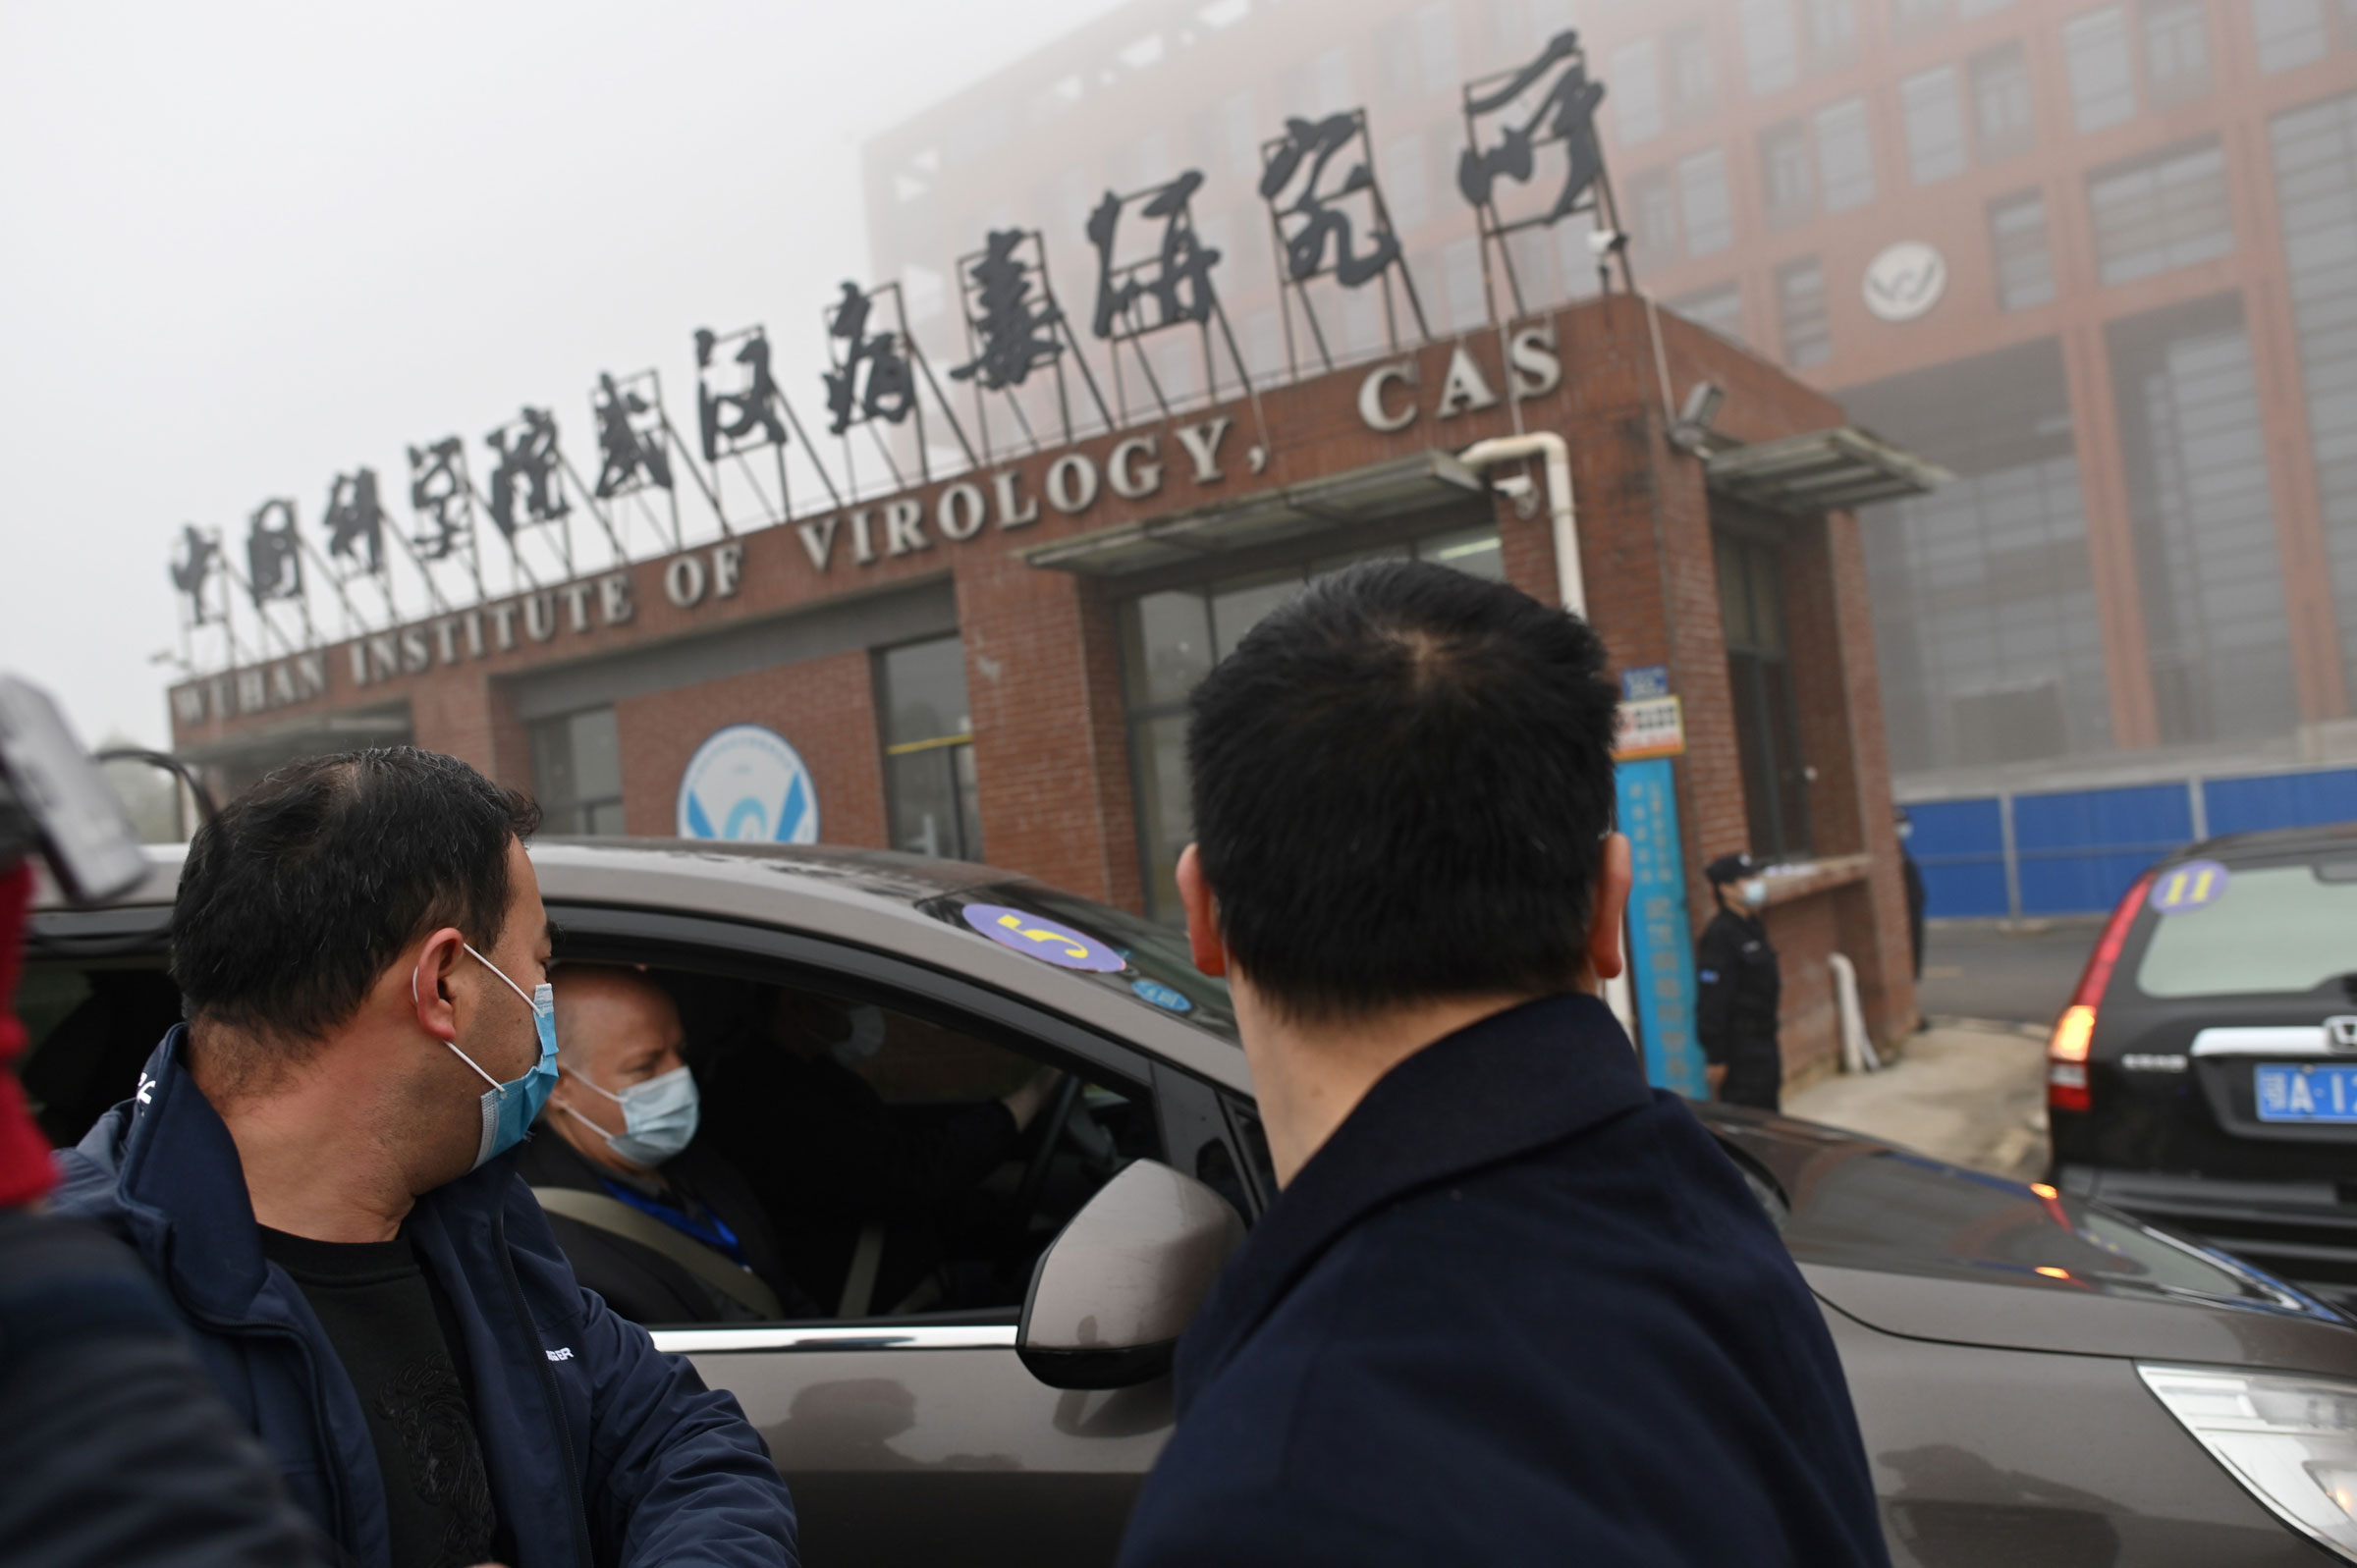 Members of the World Health Organization team investigating the origins of COVID-19 arrive by car at the Wuhan Institute of Virology on February 3, 2021. (Hector Retamal—AFP/Getty Images)